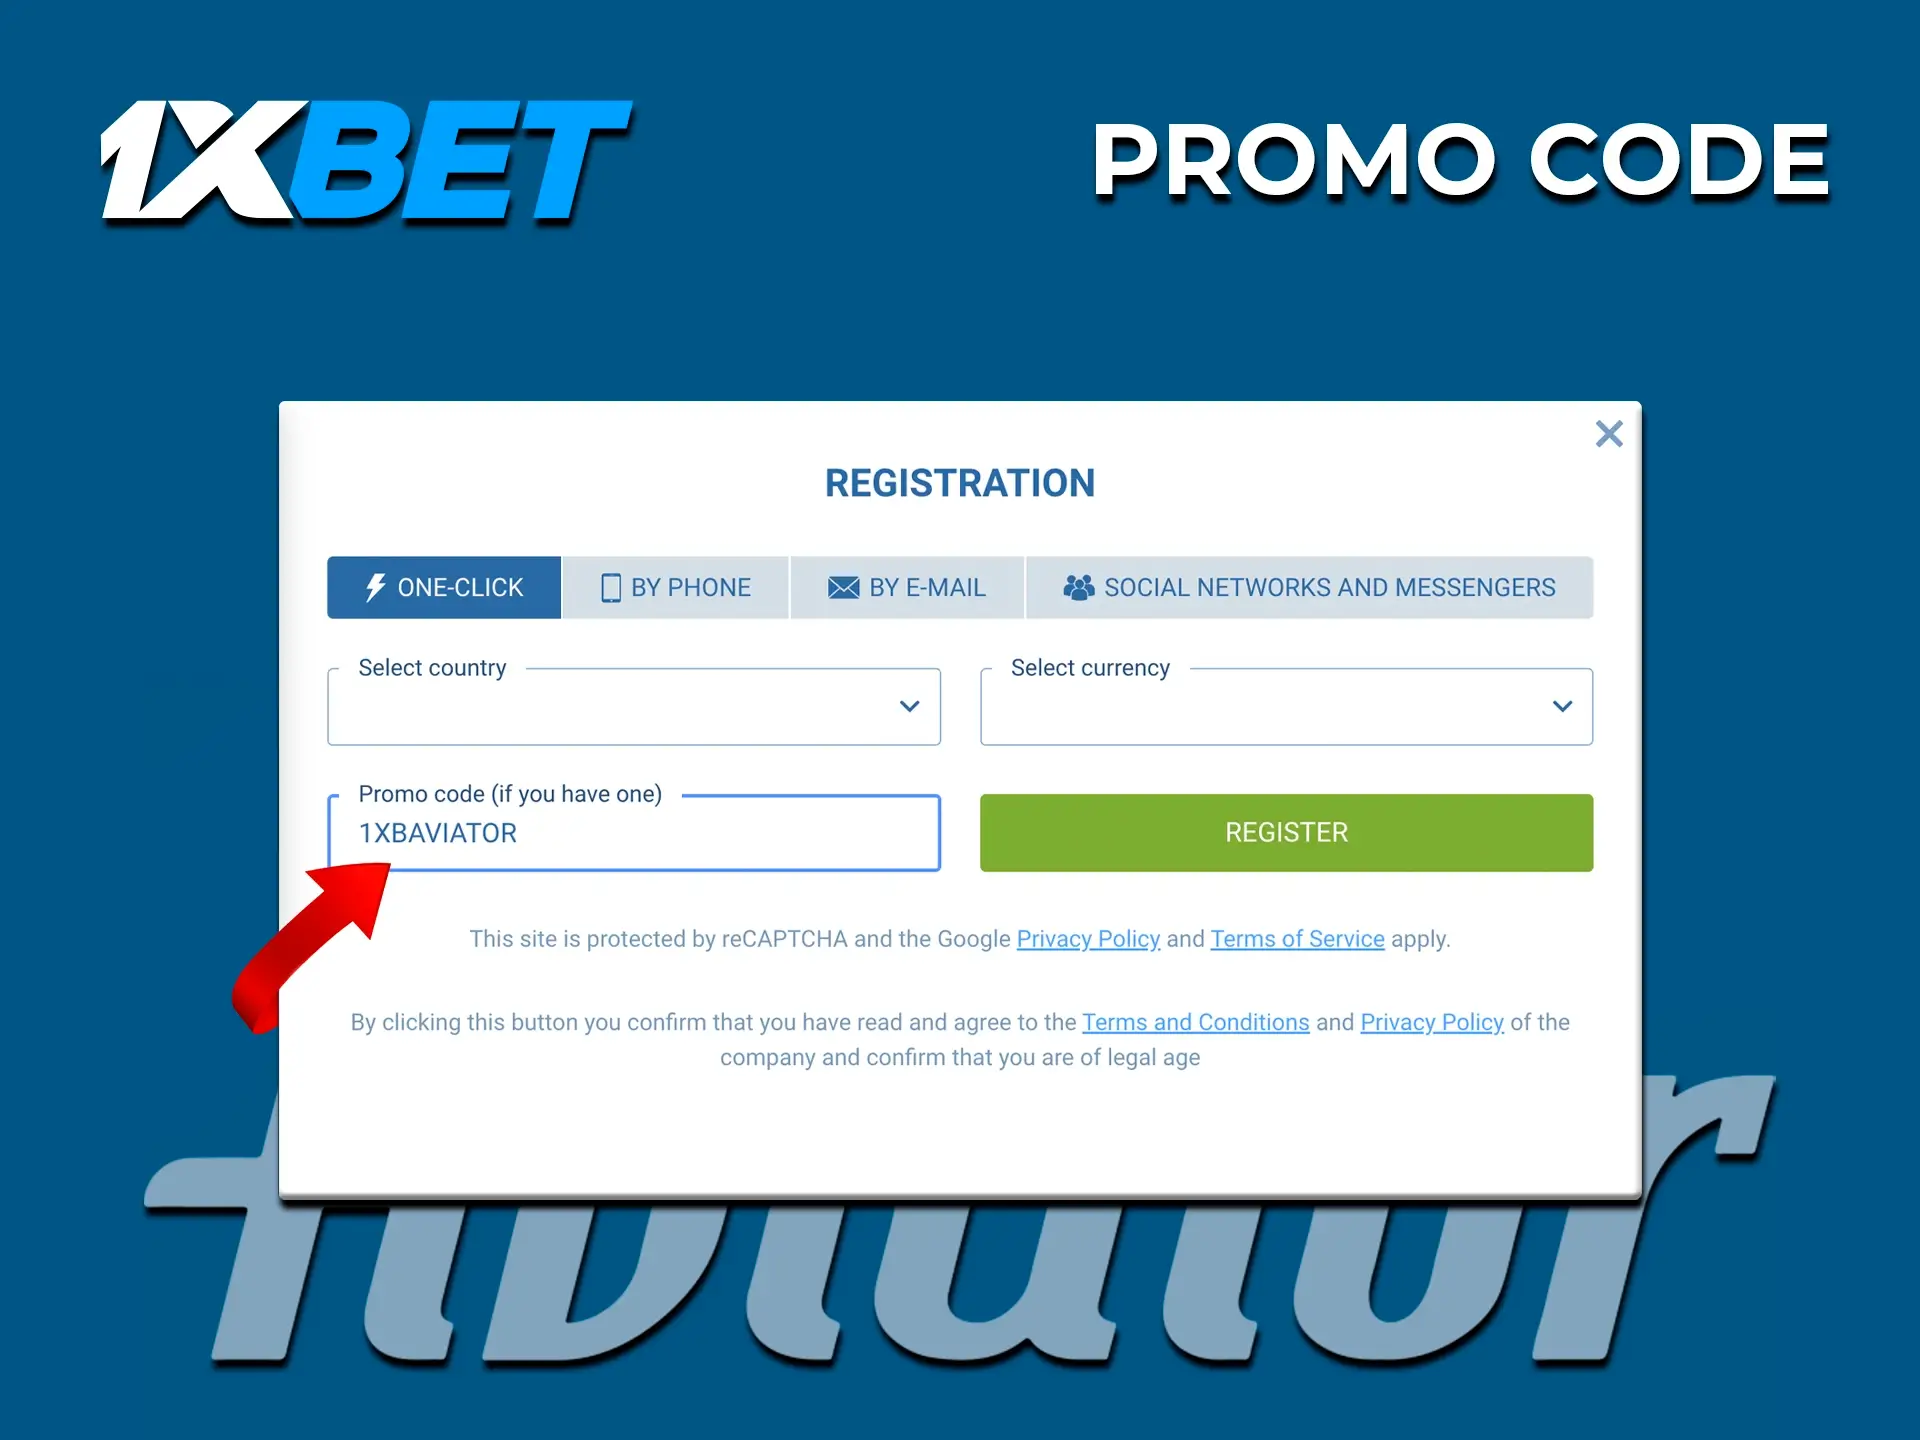 Carefully fill in your registration details and don't forget to enter your 1xBet promo code.